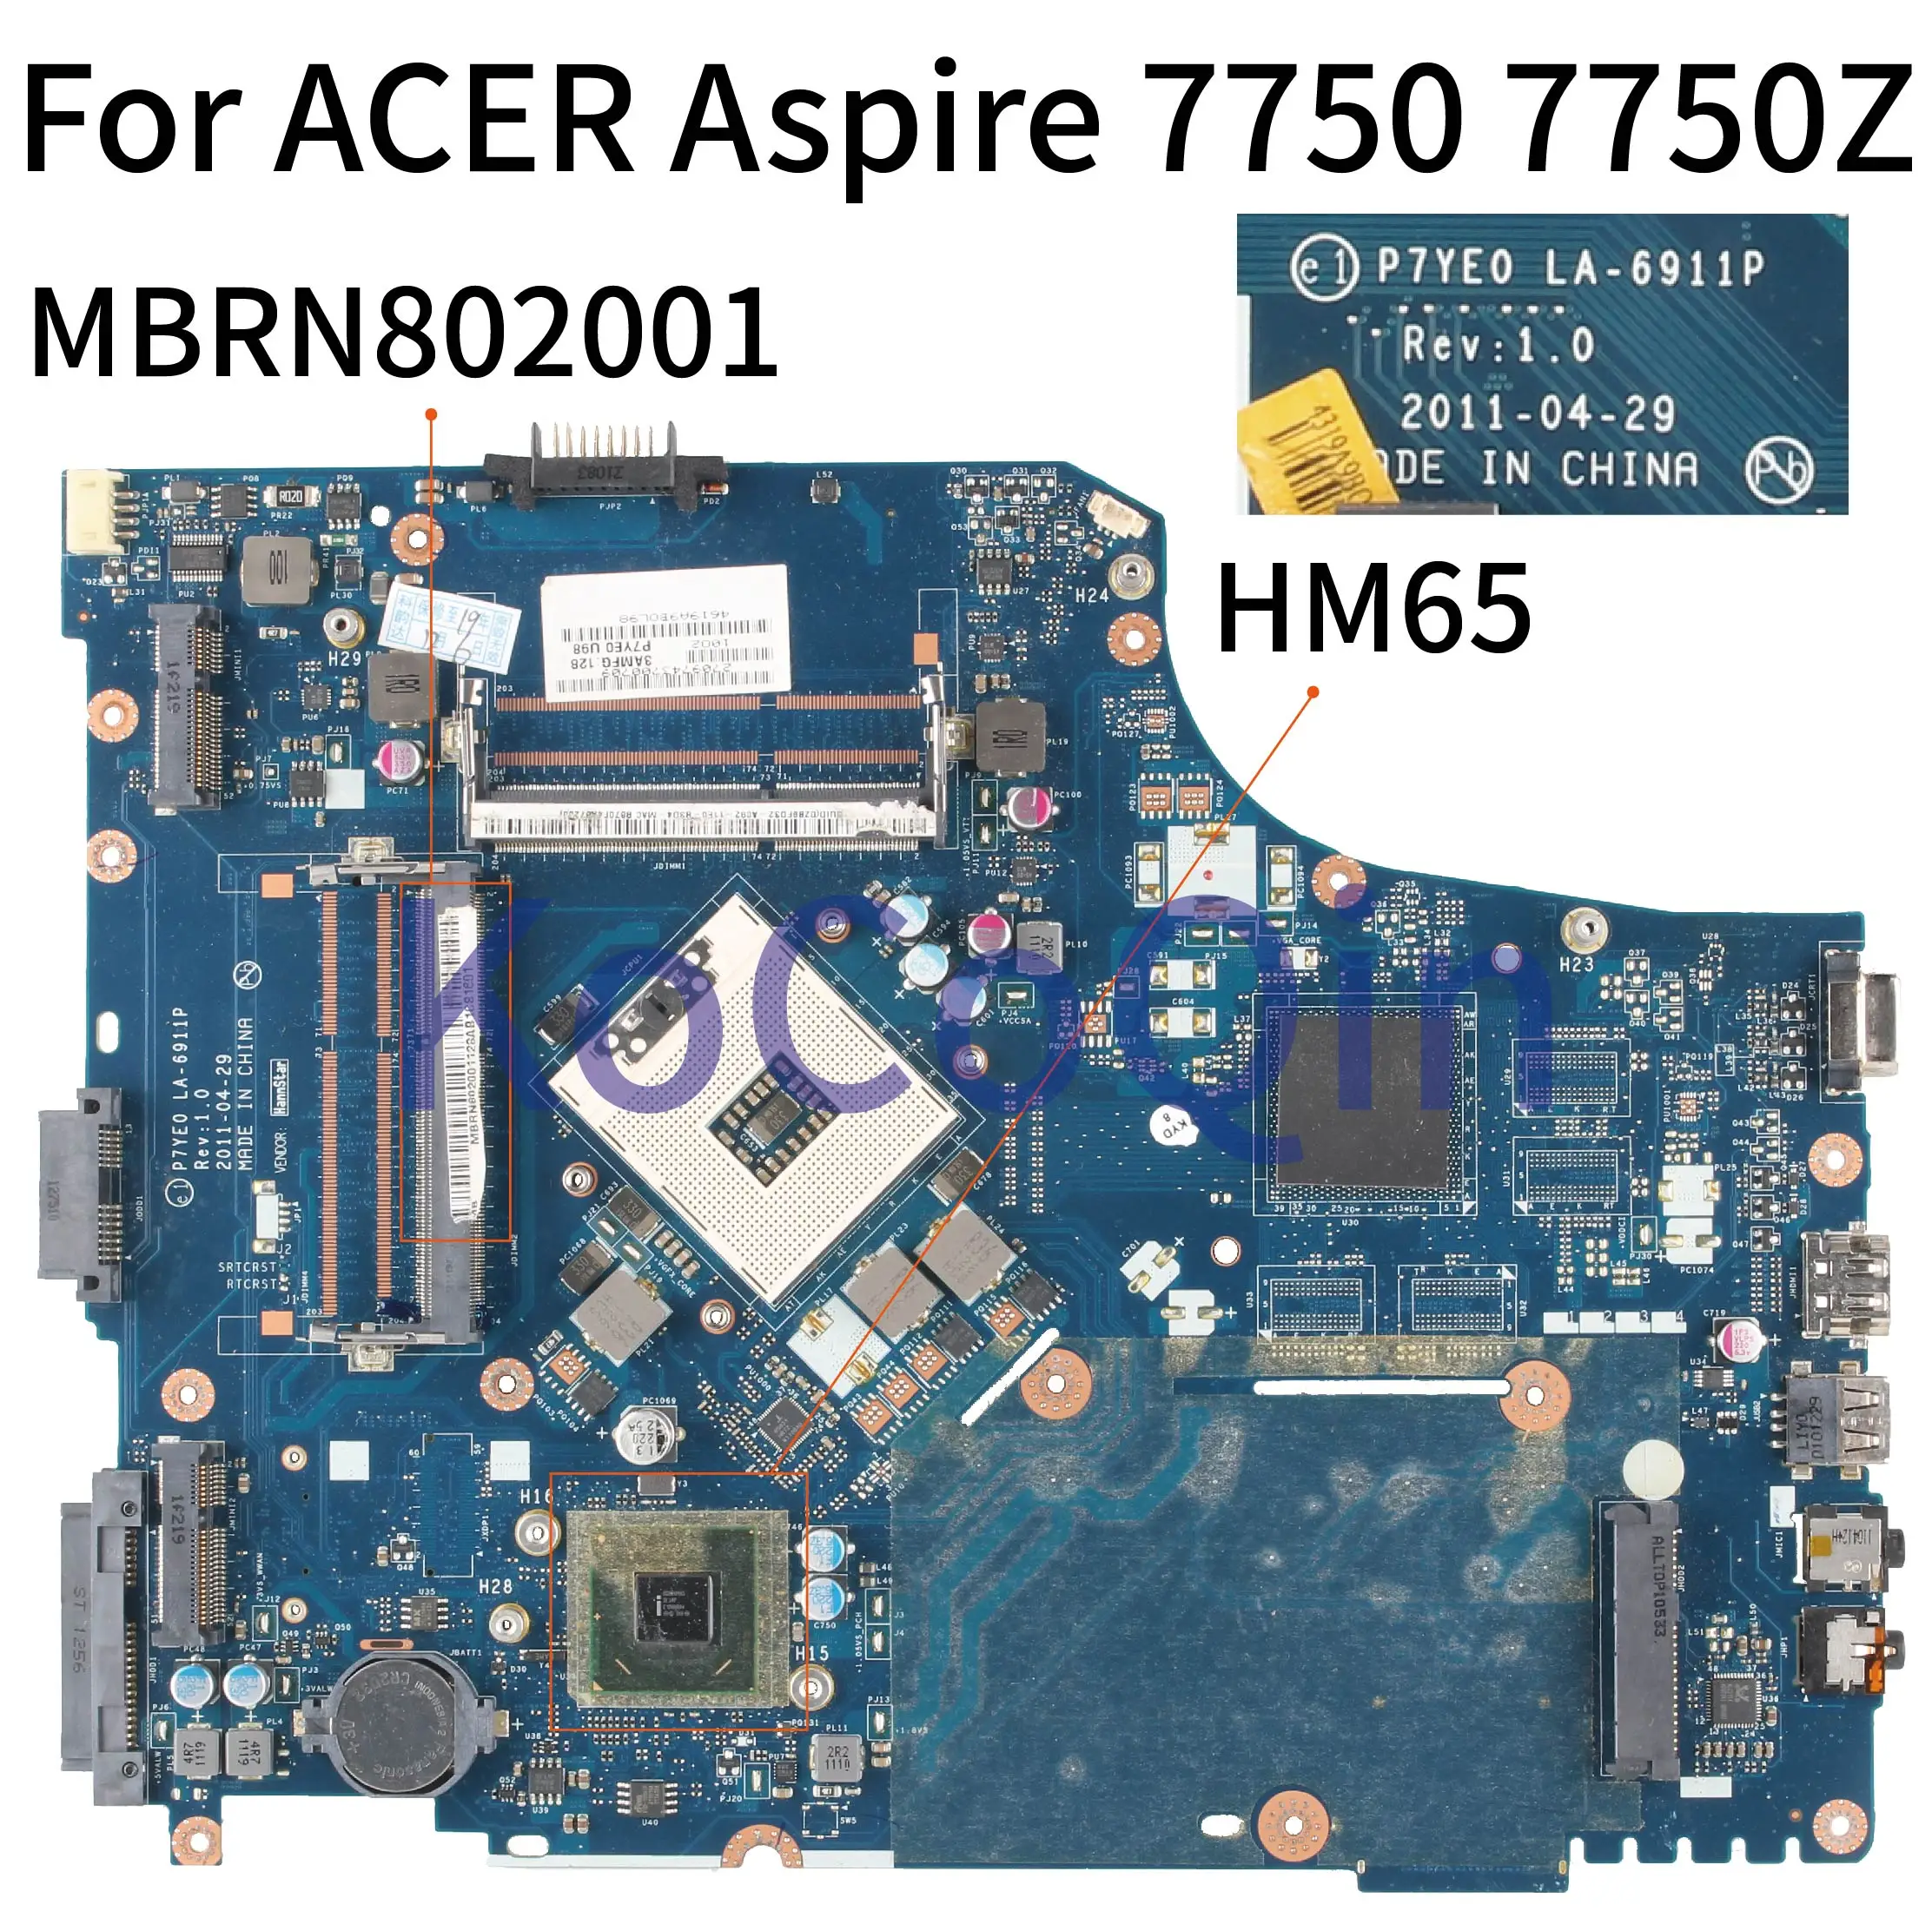 kocoqin laptop motherboard for acer aspire 7750 7750z hm65 mainboard p7ye0 la 6911p mbrn802001 mb rn802 001 free global shipping